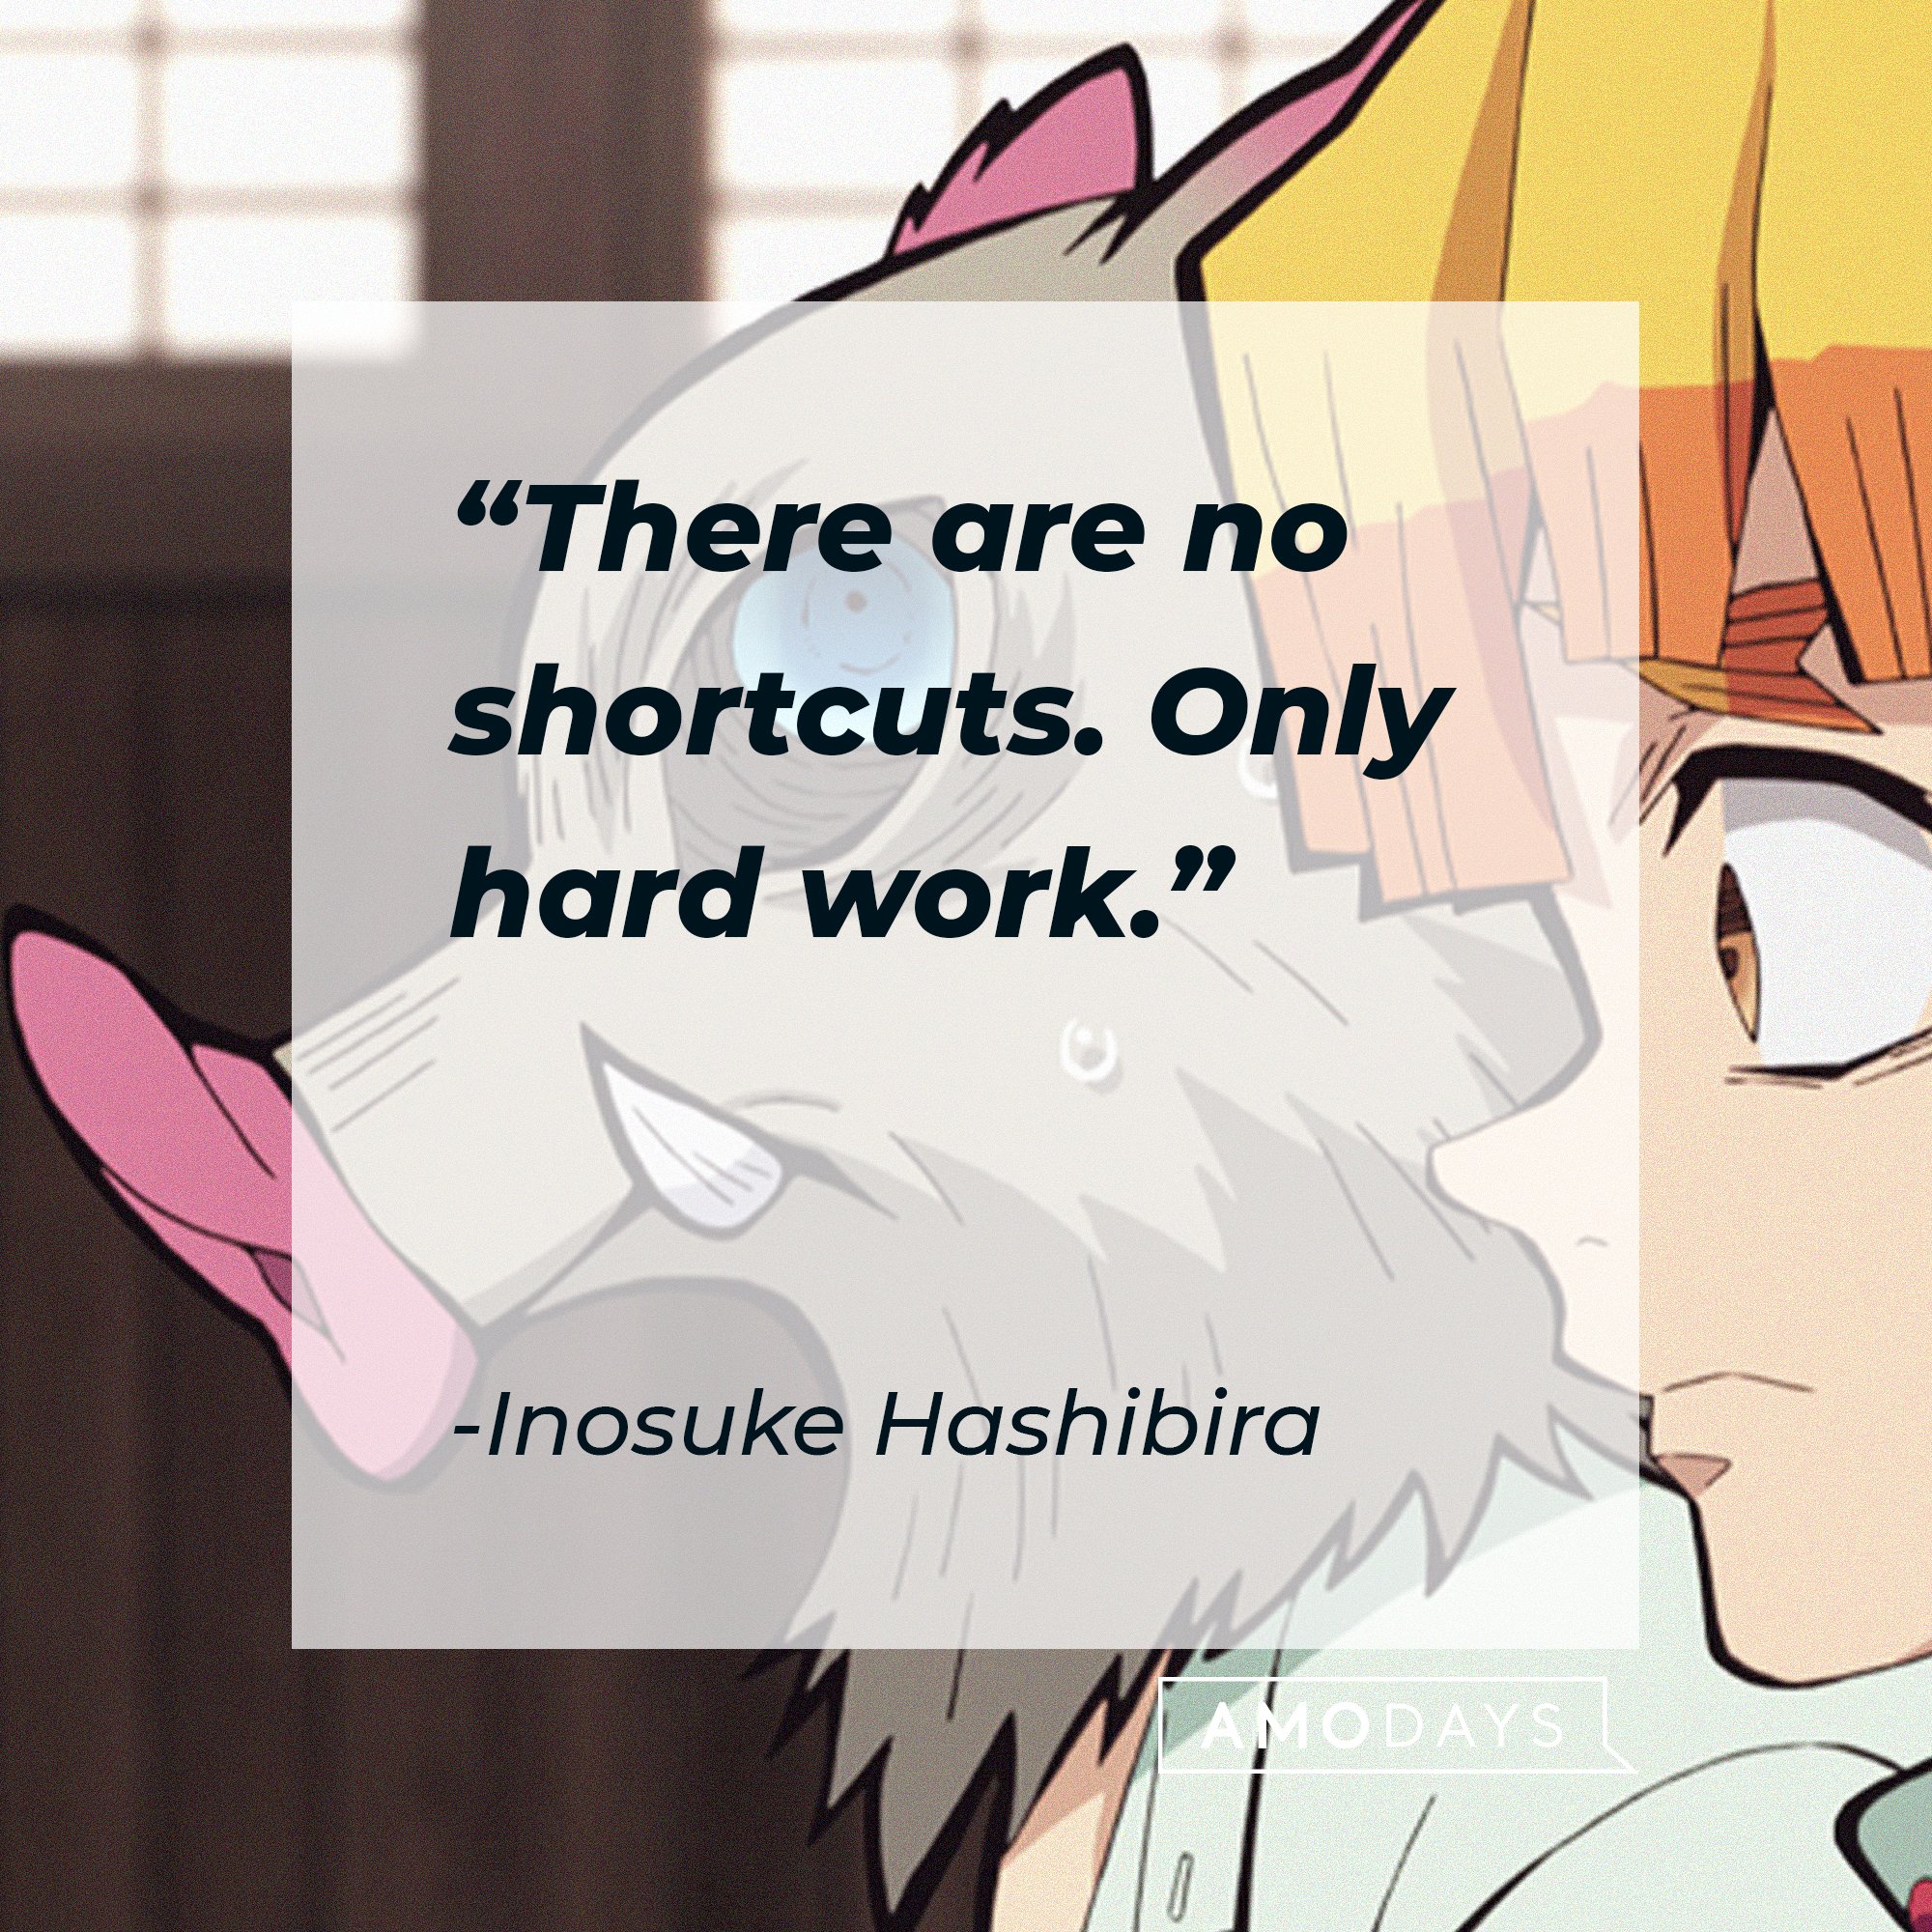 Inosuke Hashibira’s quote: "There are no shortcuts. Only hard work." | Image: AmoDays